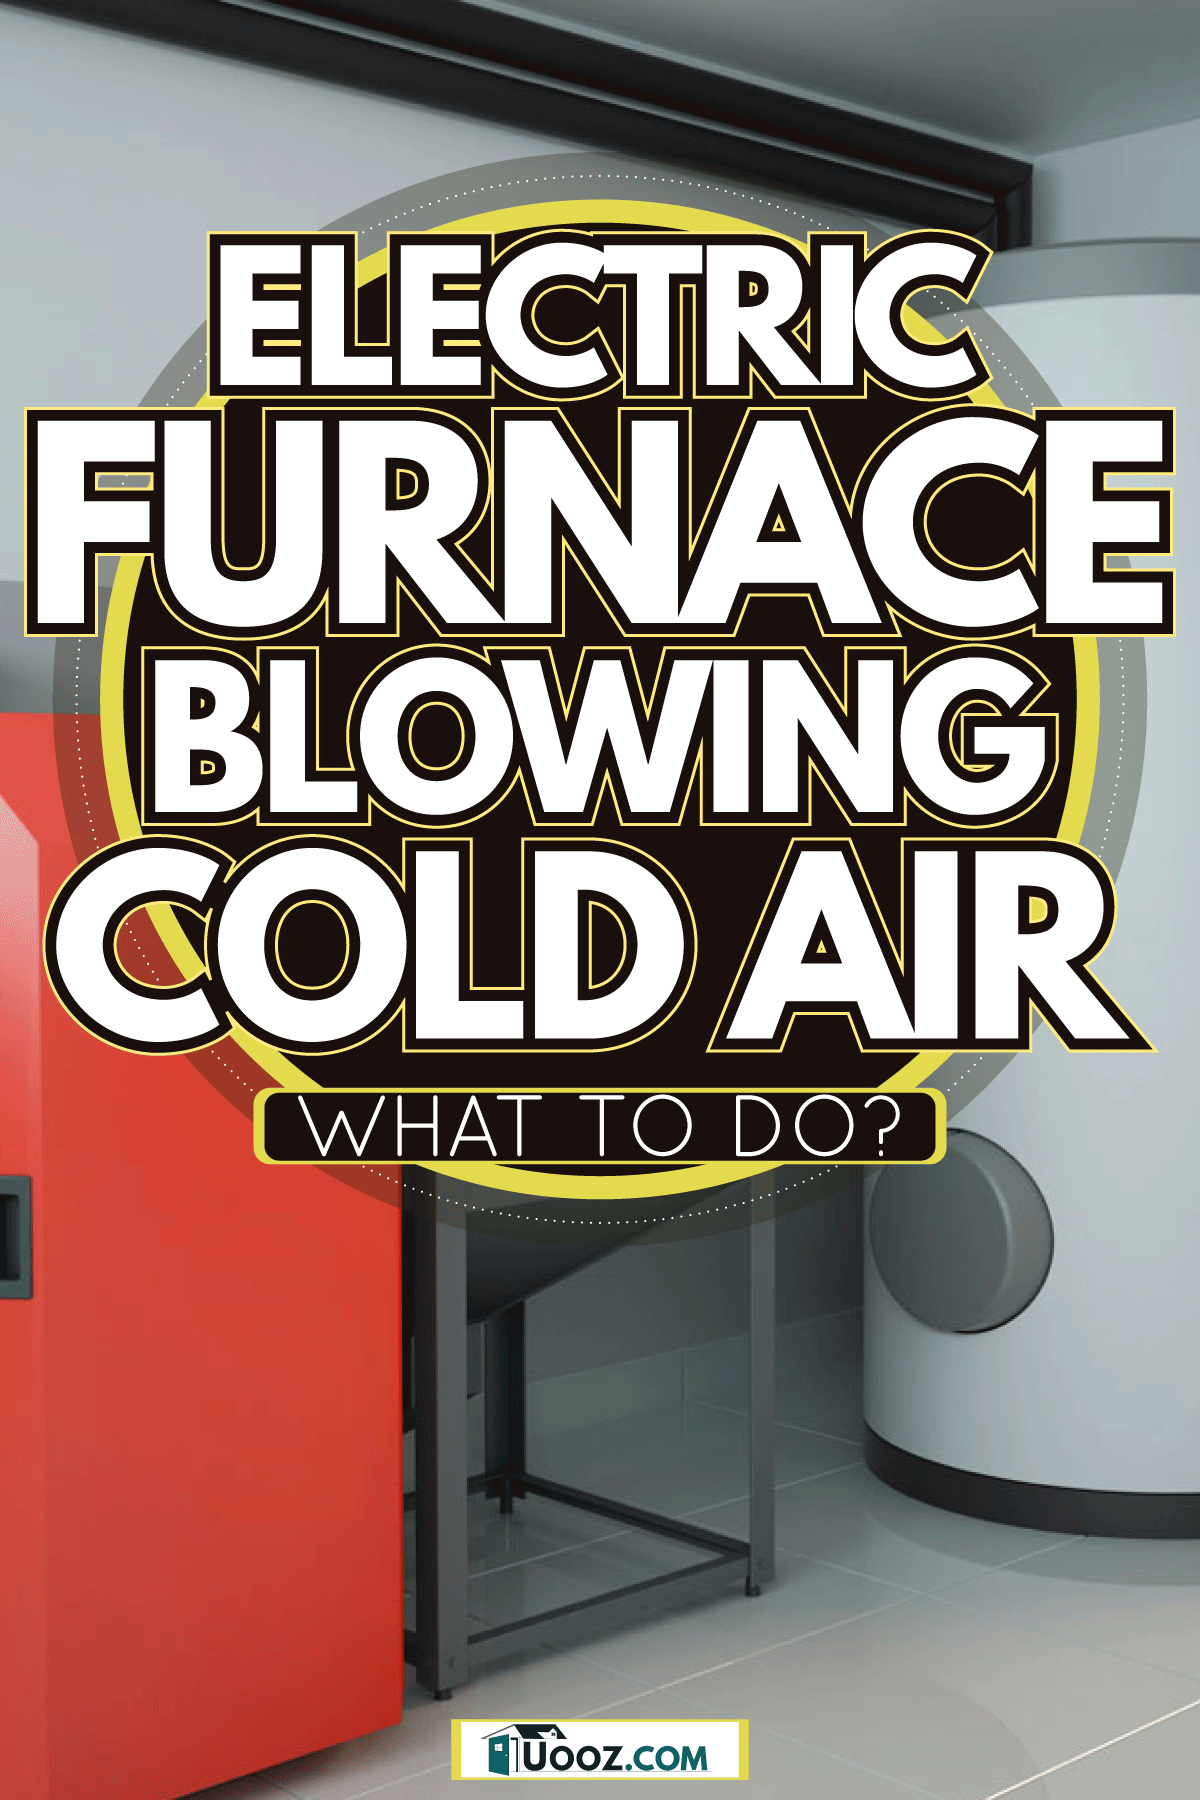 Recommended things to do when having an electric furnace, Electric Furnace Blowing Cold Air What To Do